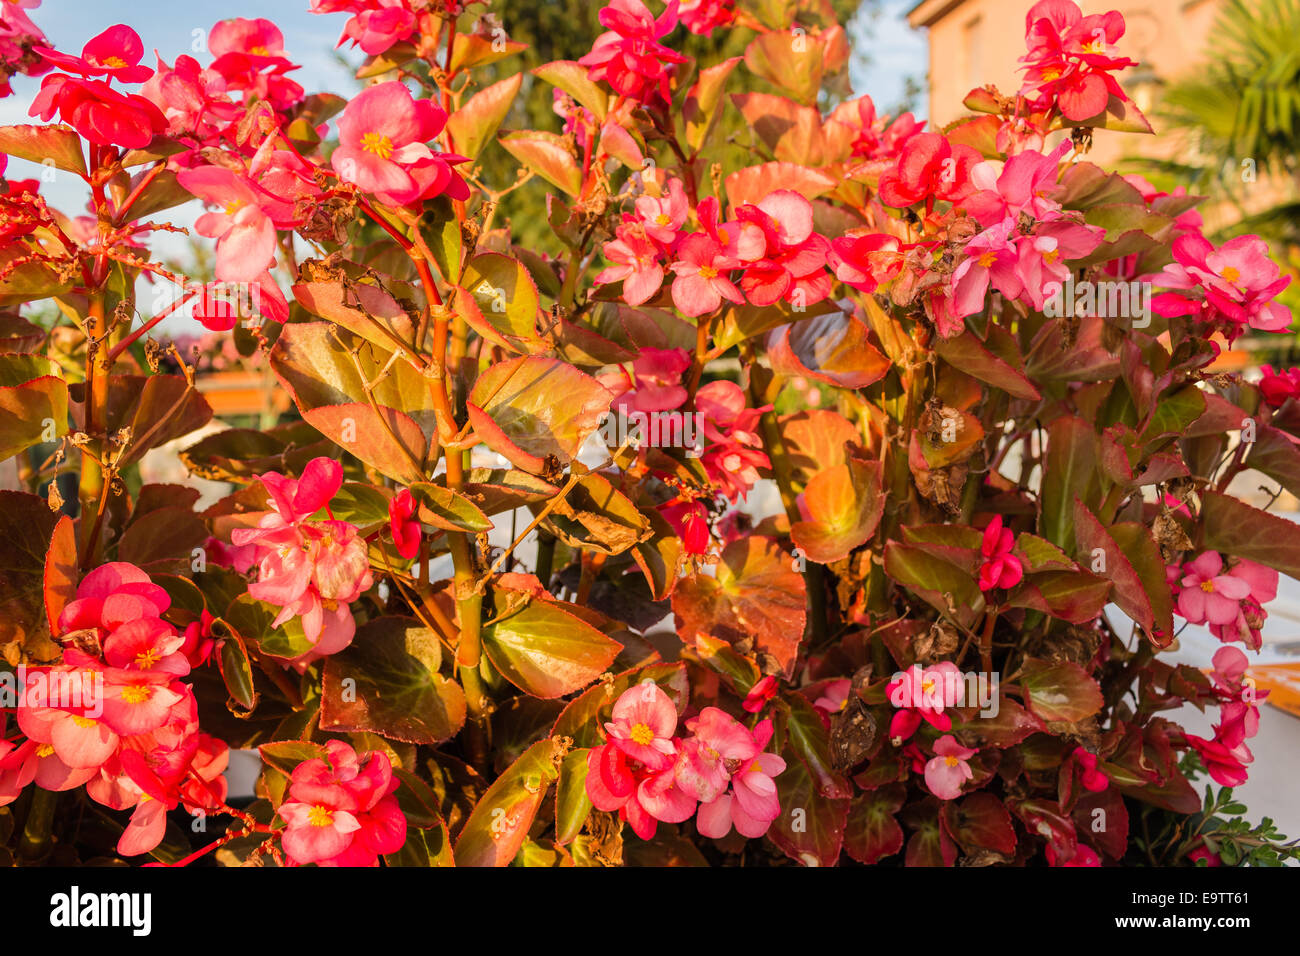 Bush of begonia flowers, succulent plant with green and brown tender leaves, brtanches and trunk Stock Photo